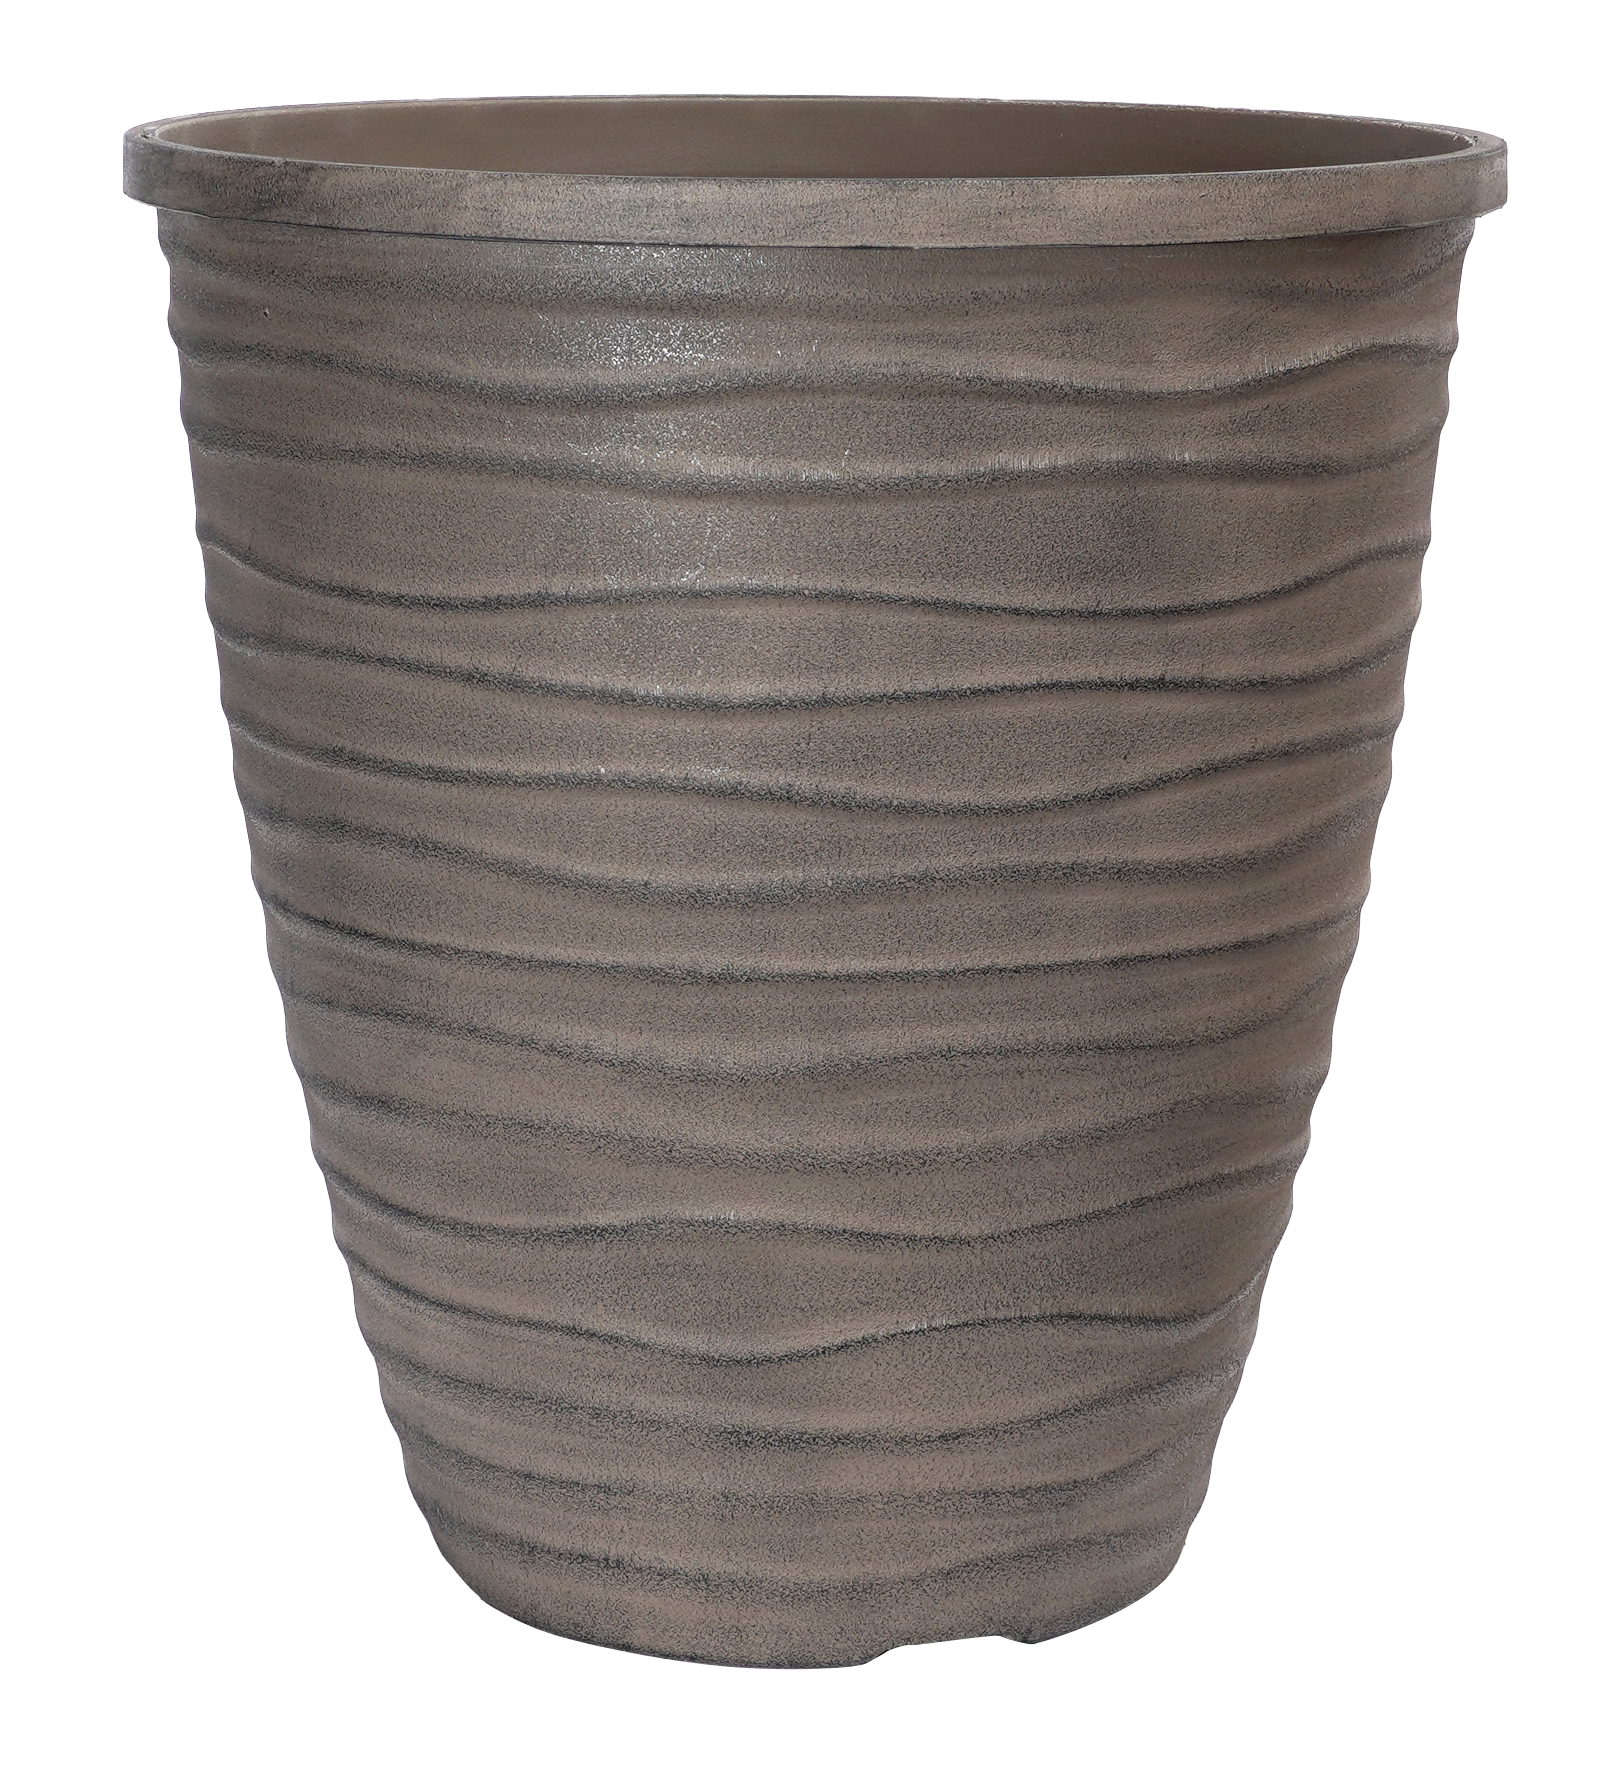 14" Tall Dune Planter with Rim Shaded Taupe - 13 per case